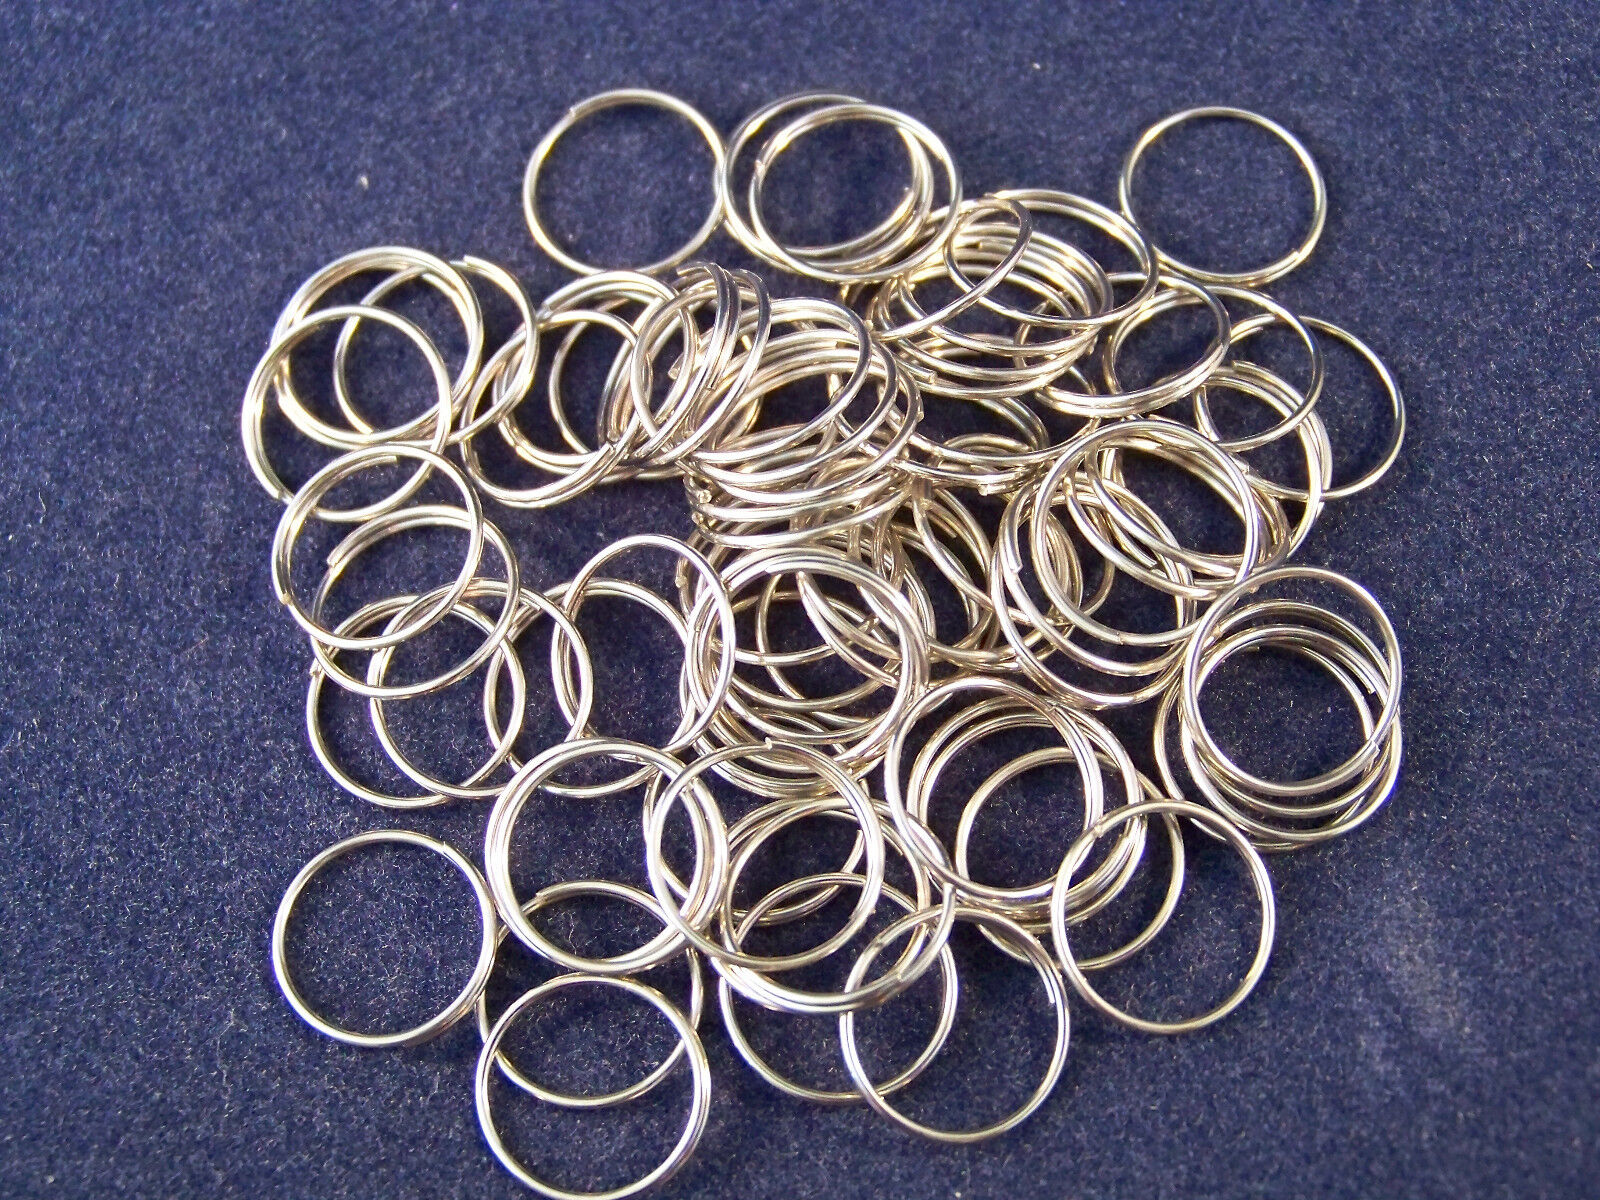 100 PC 12MM SILVER RING CONNECTOR CHANDELIER PARTS CHAIN CRYSTAL HANGING